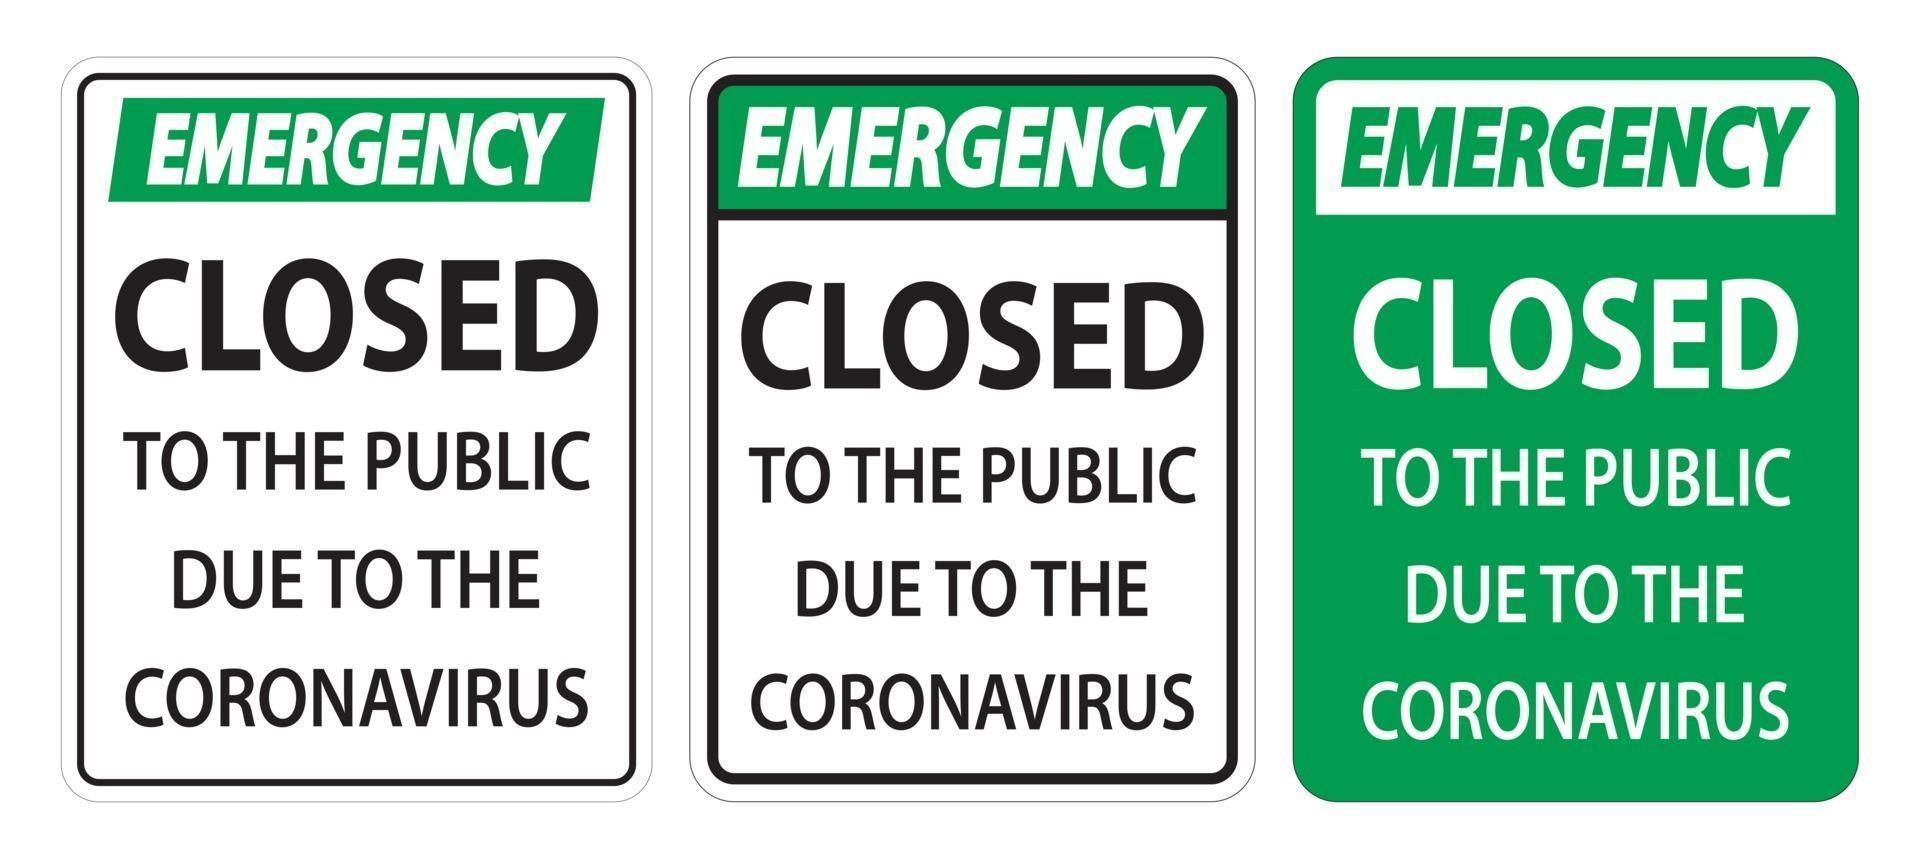 Emergency Closed to public sign vector